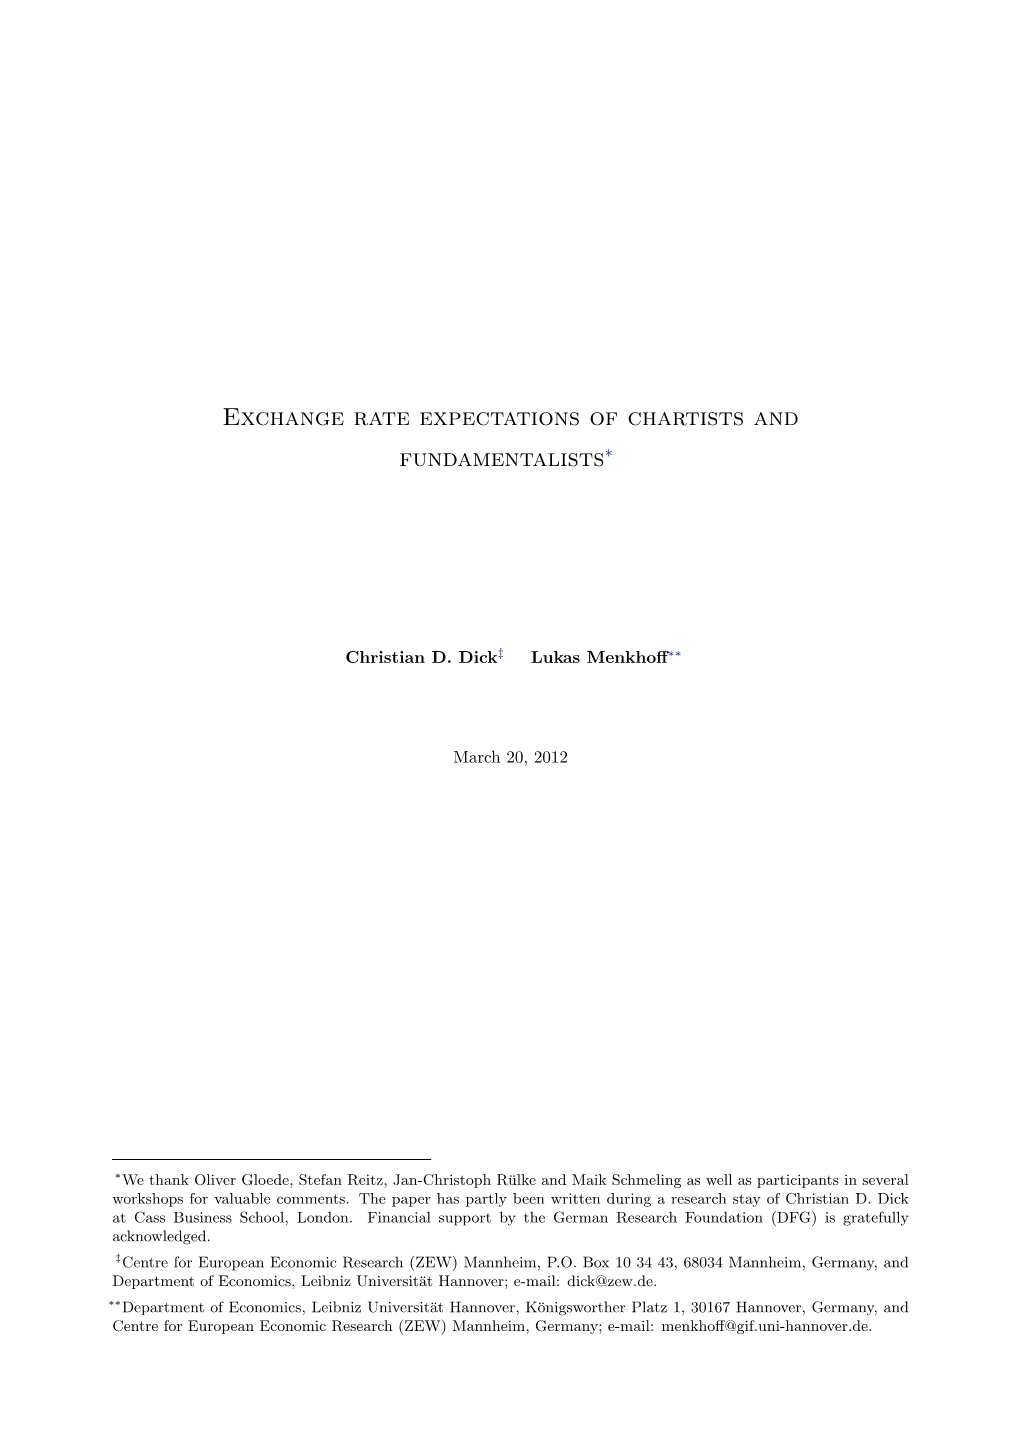 Exchange Rate Expectations of Chartists and Fundamentalists∗